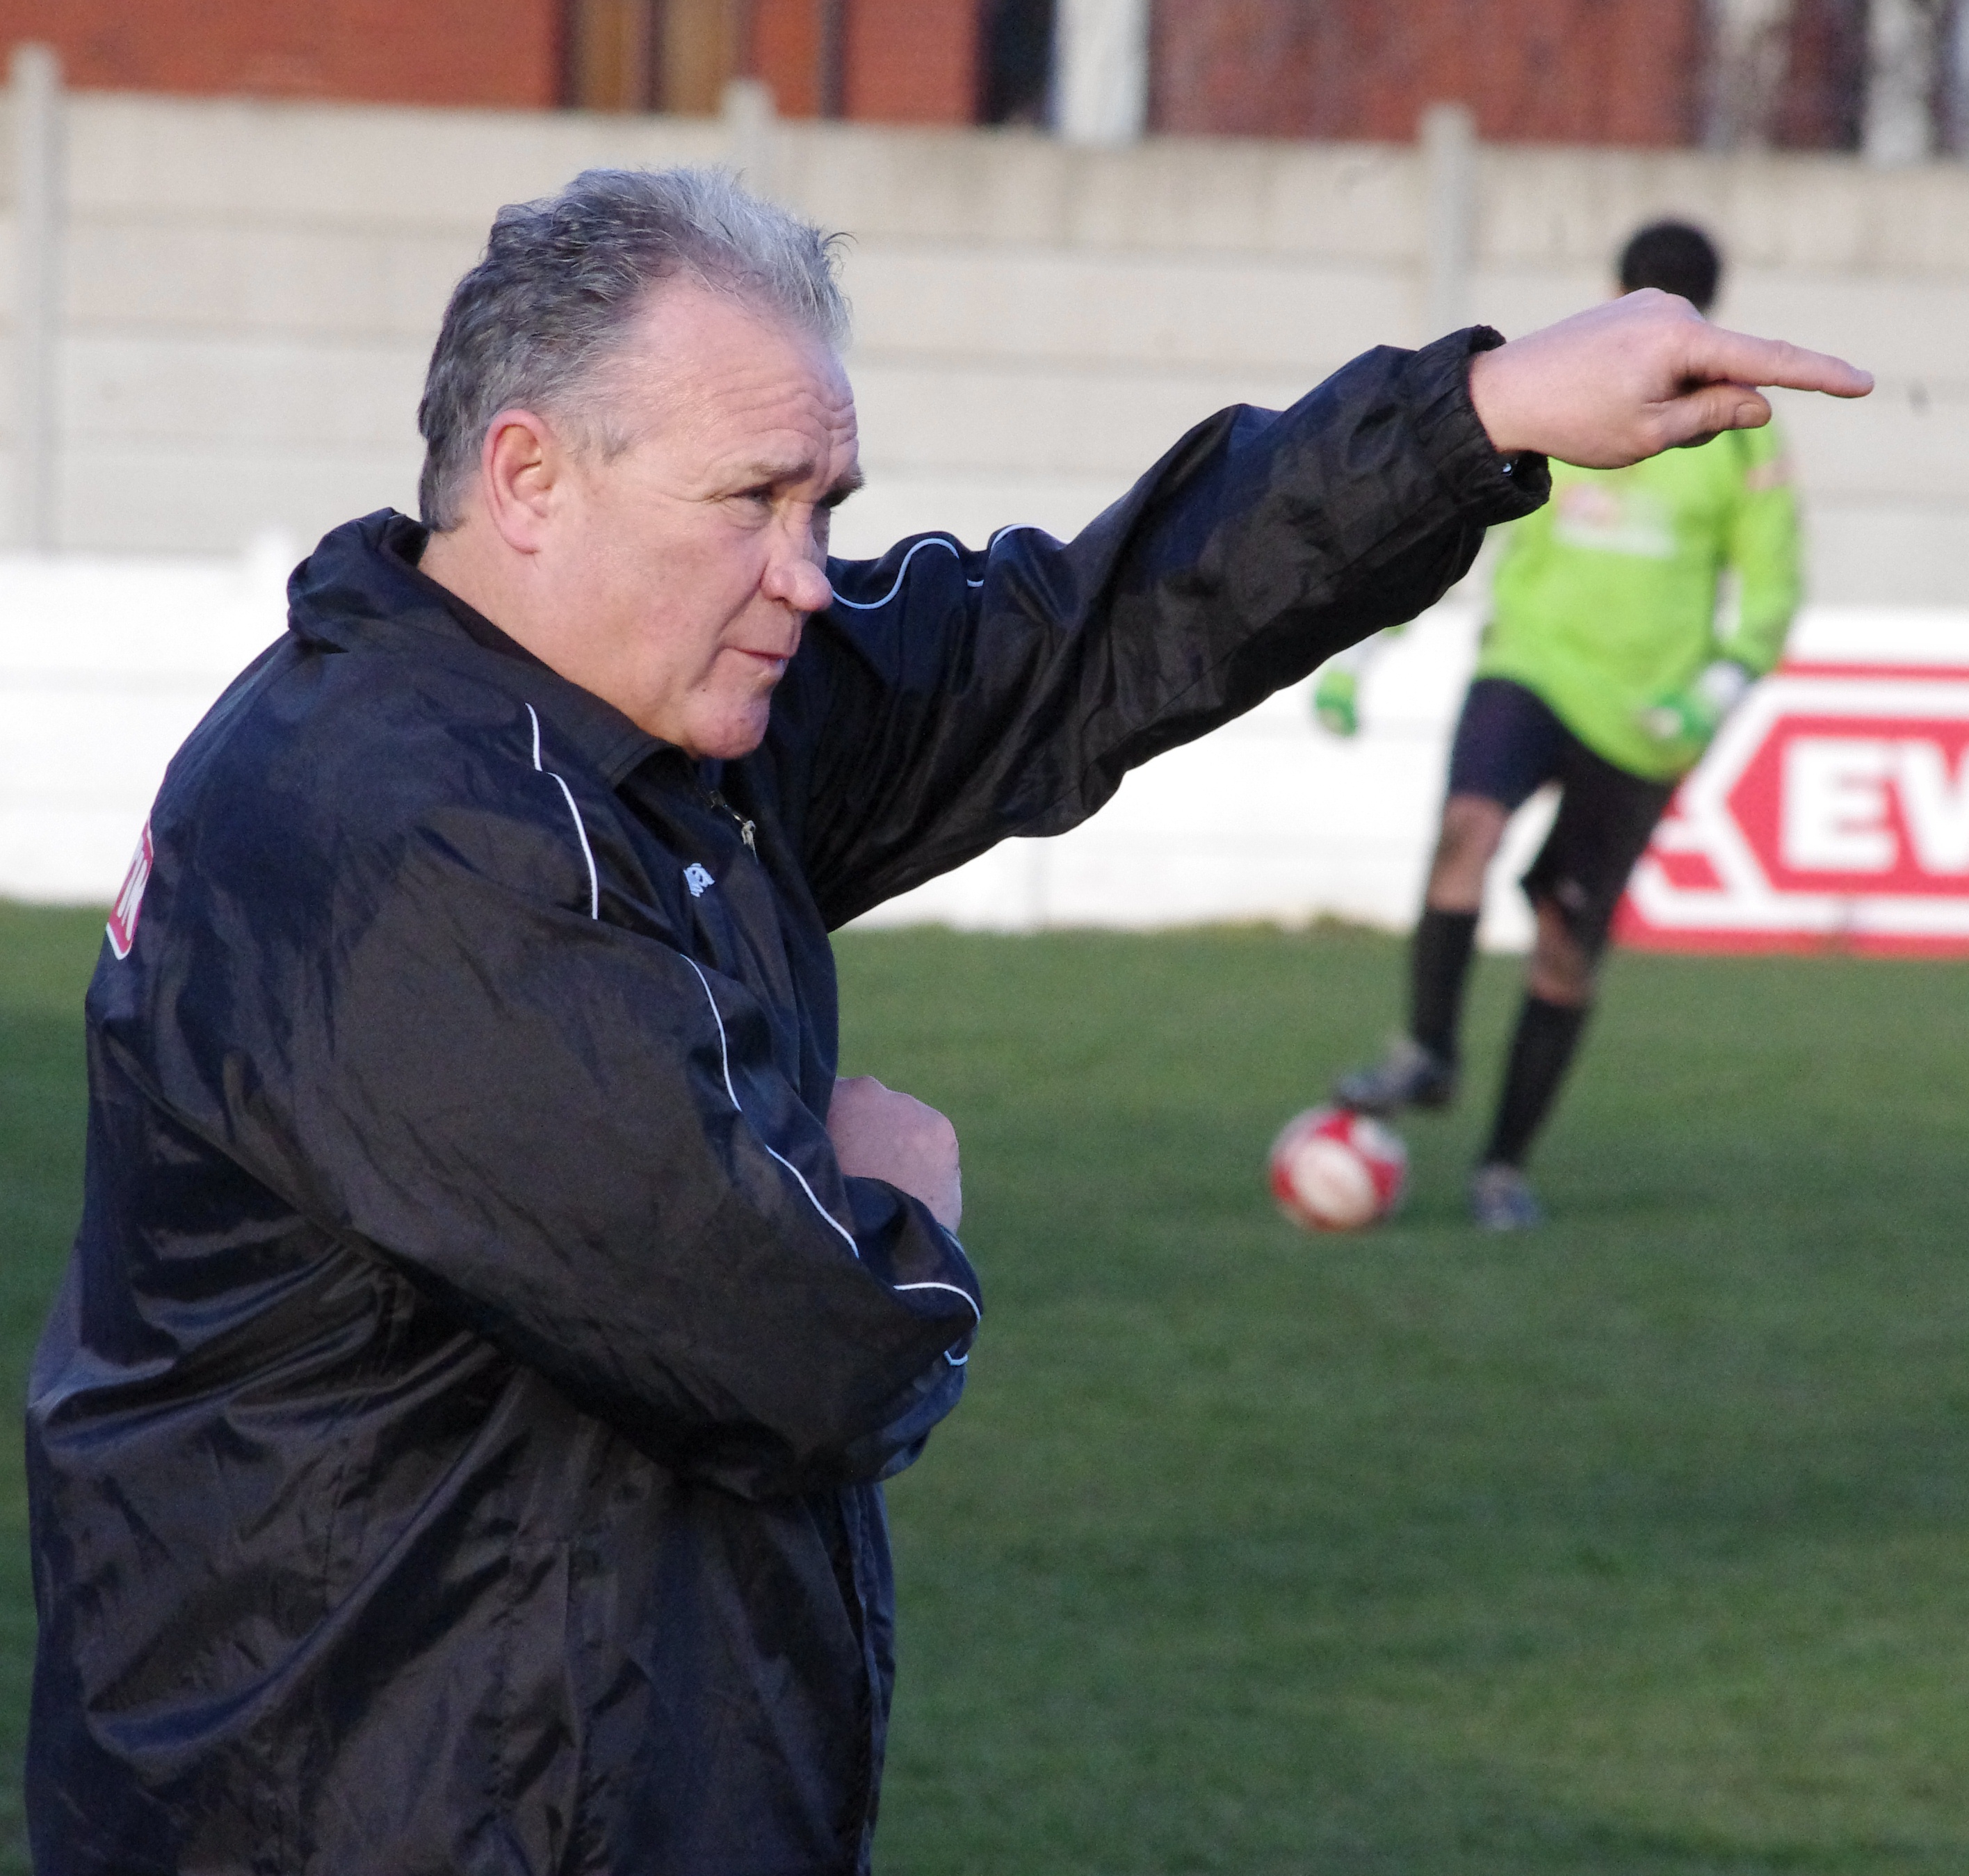 John Reed's Ossett Town will play against Bradford City tomorrow night and five or six first team players will appear